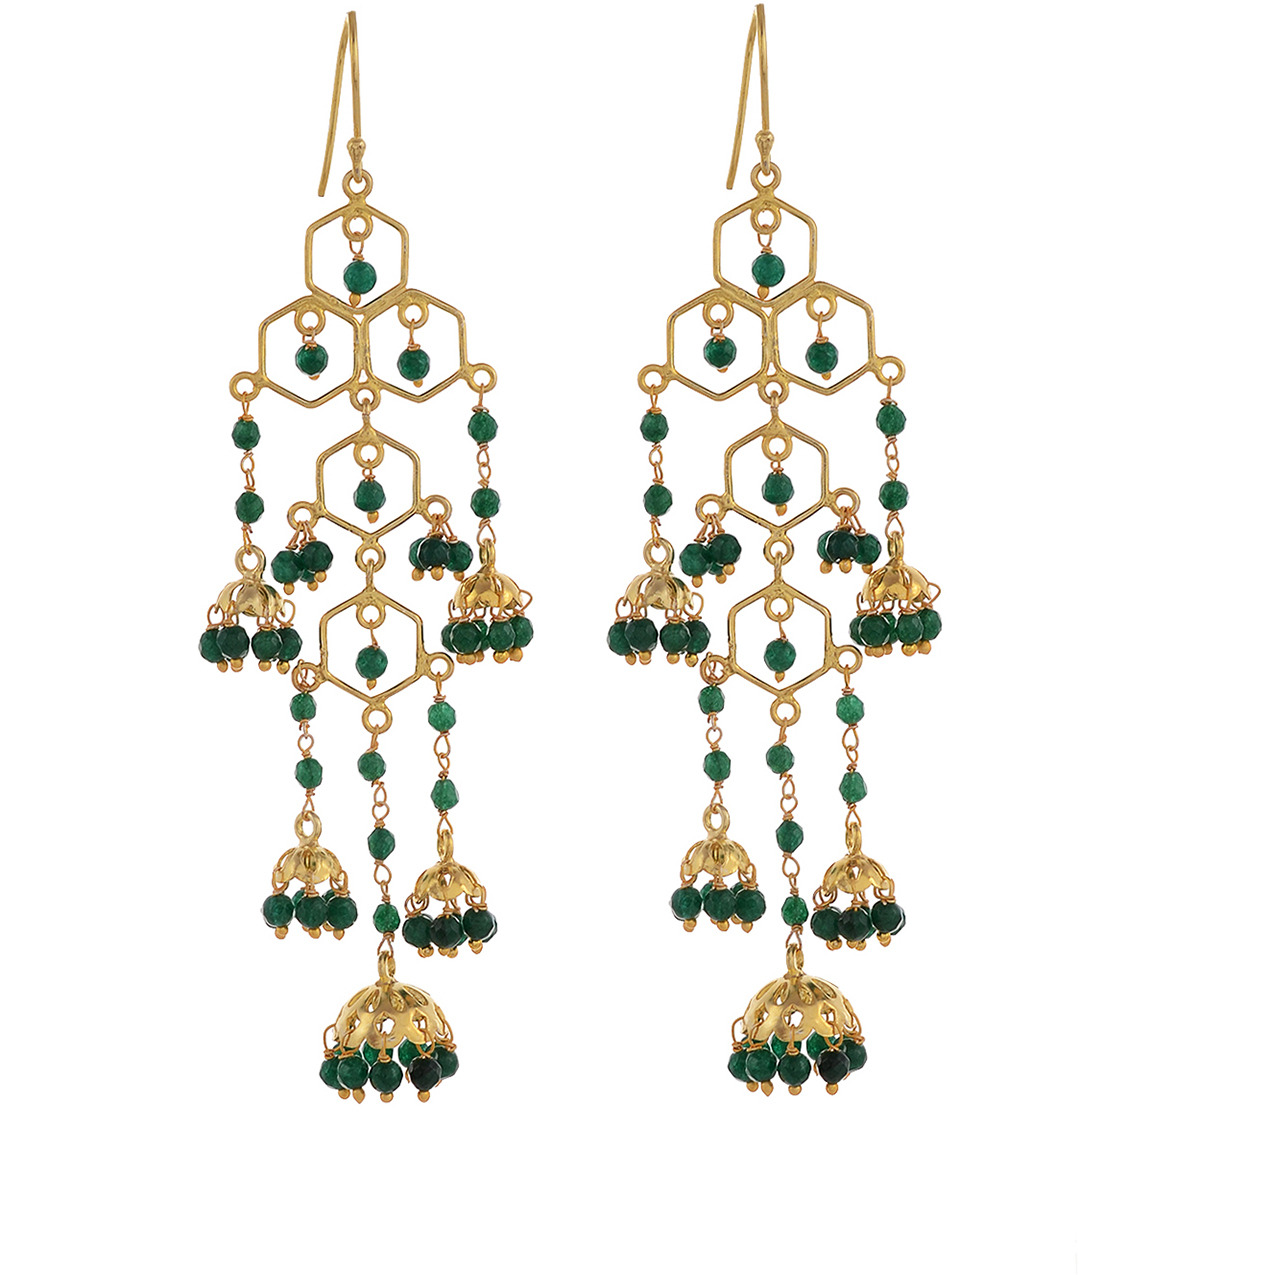 Gold Pated, Green Beads Beautiful Jhumka Earrings By Silvermerc Designs